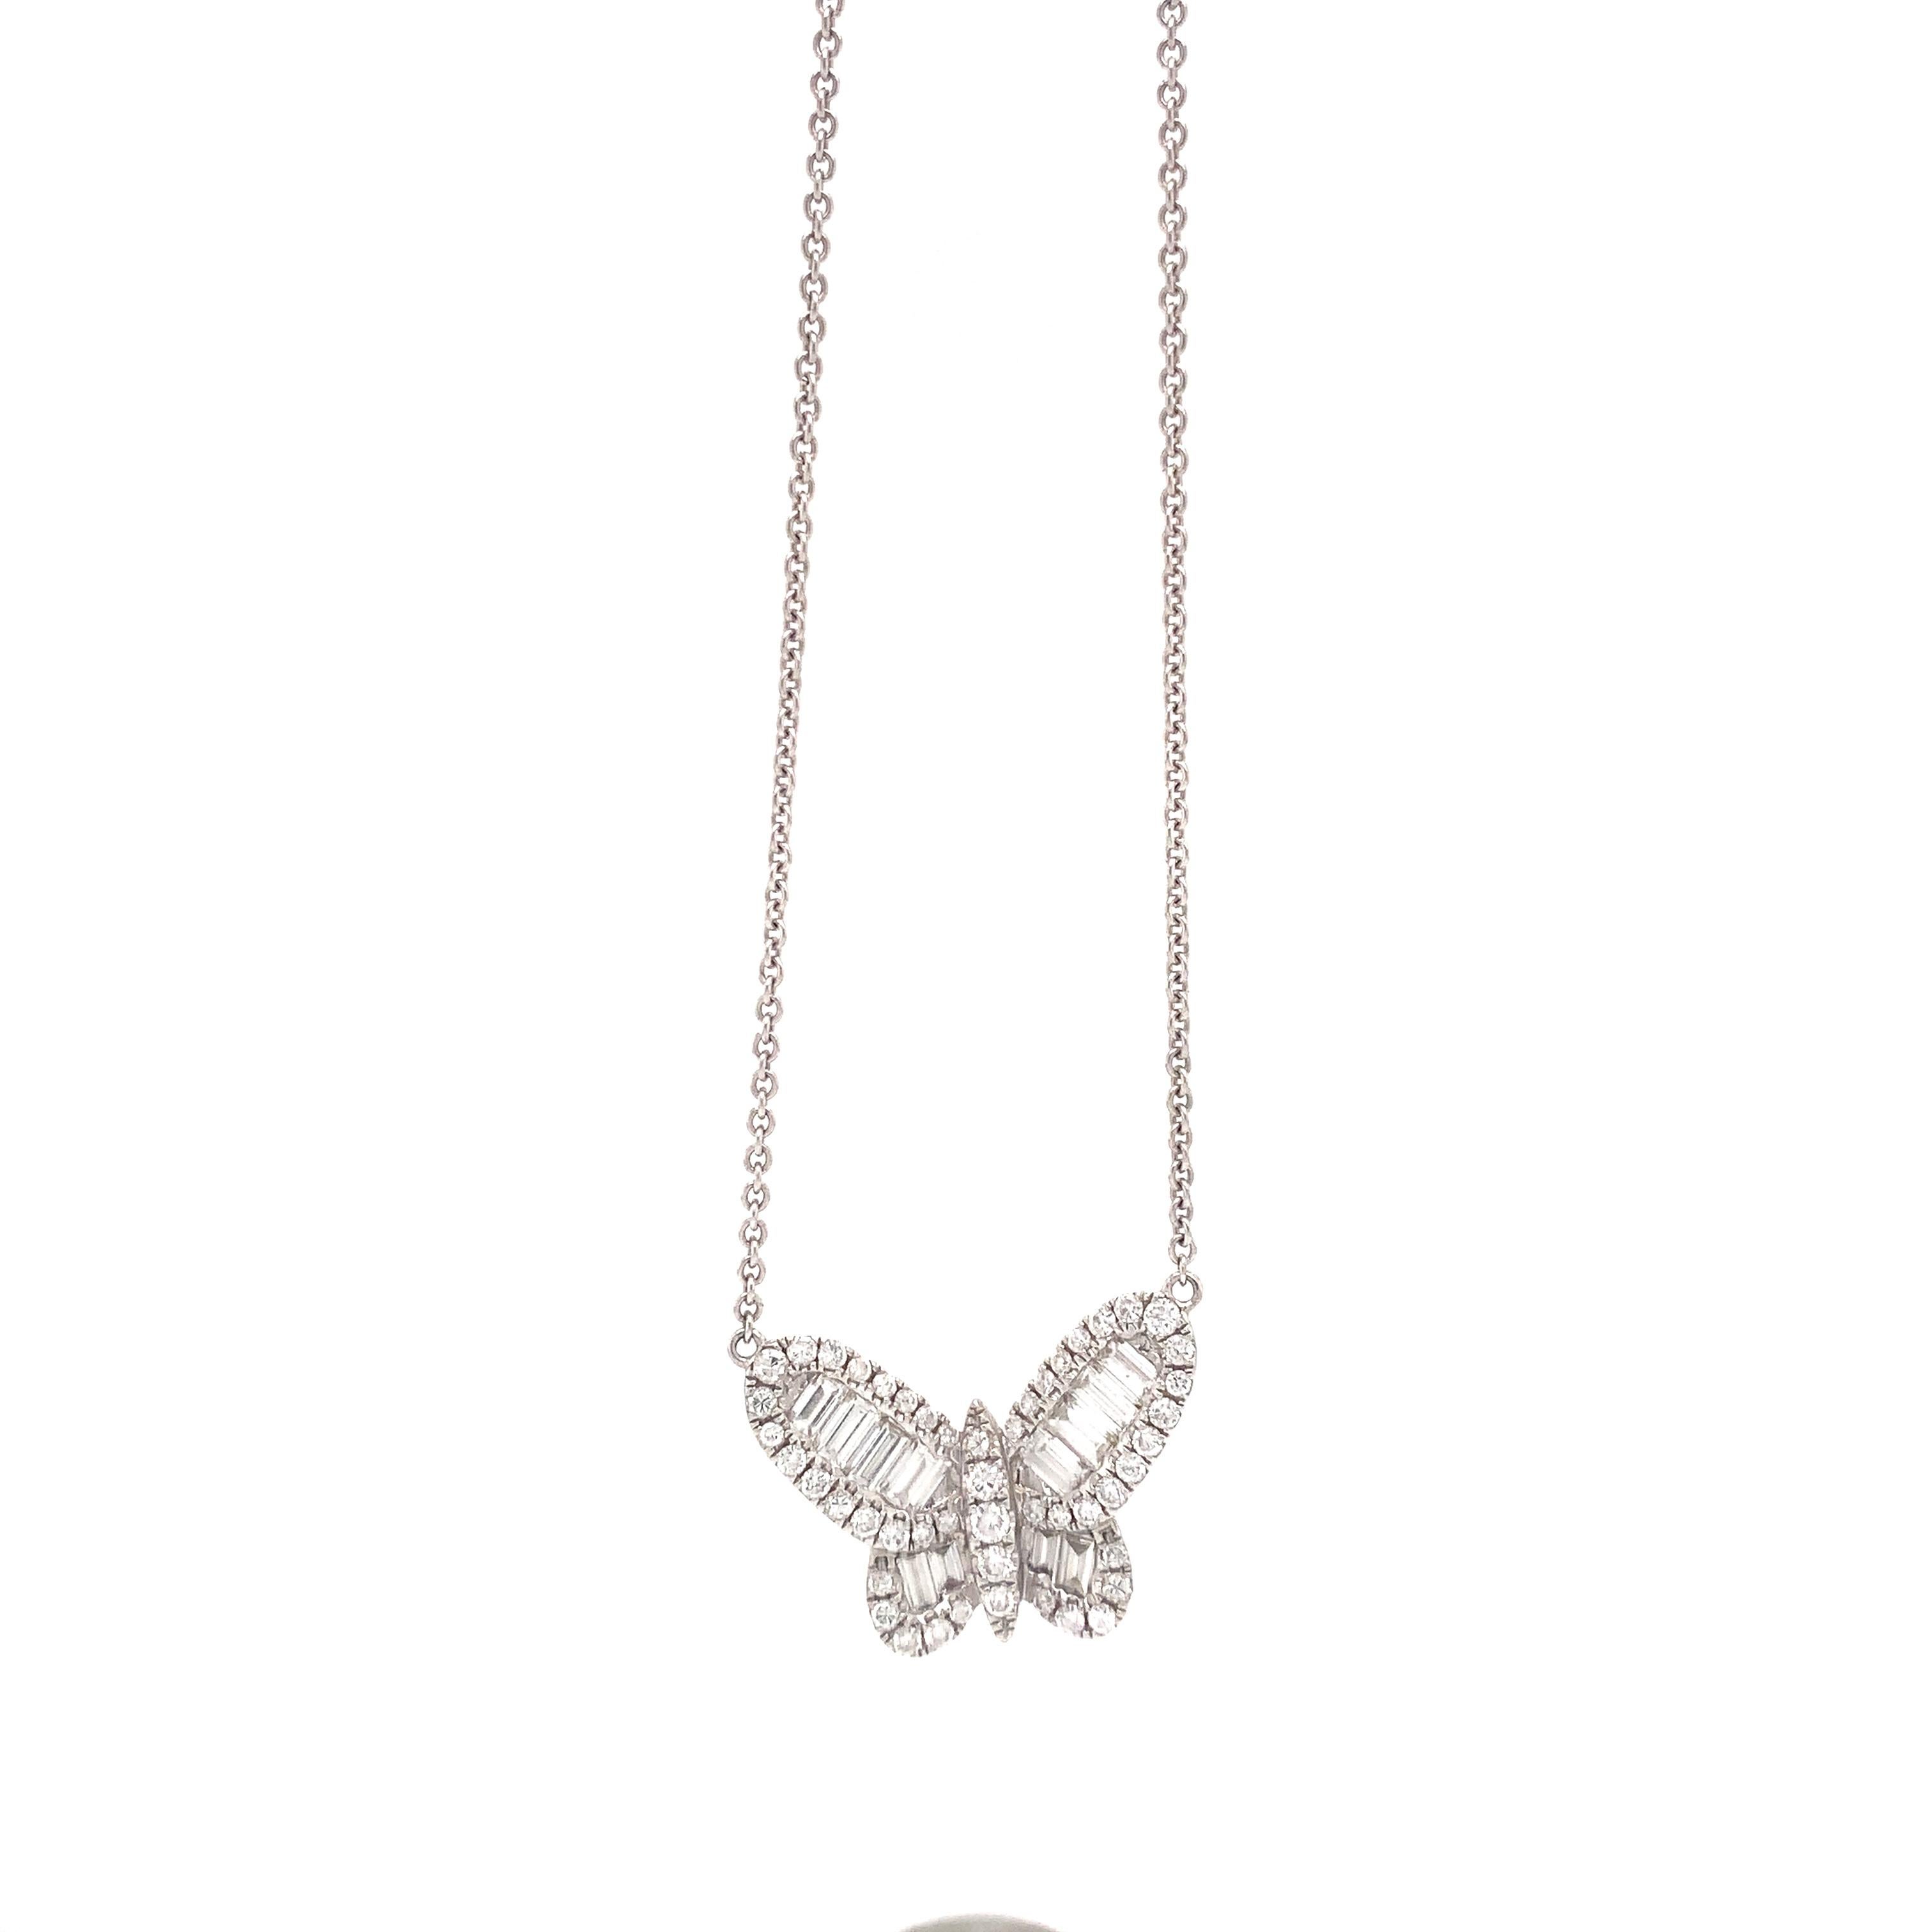 This sophisticated butterfly Necklace is crafted of 18k white gold with total 2.25 carat weight of diamonds in F Color and VS1 clarity.



About us:
Cashingdiamonds is not an authorized dealer or licensor of any of the products we sell. We do not